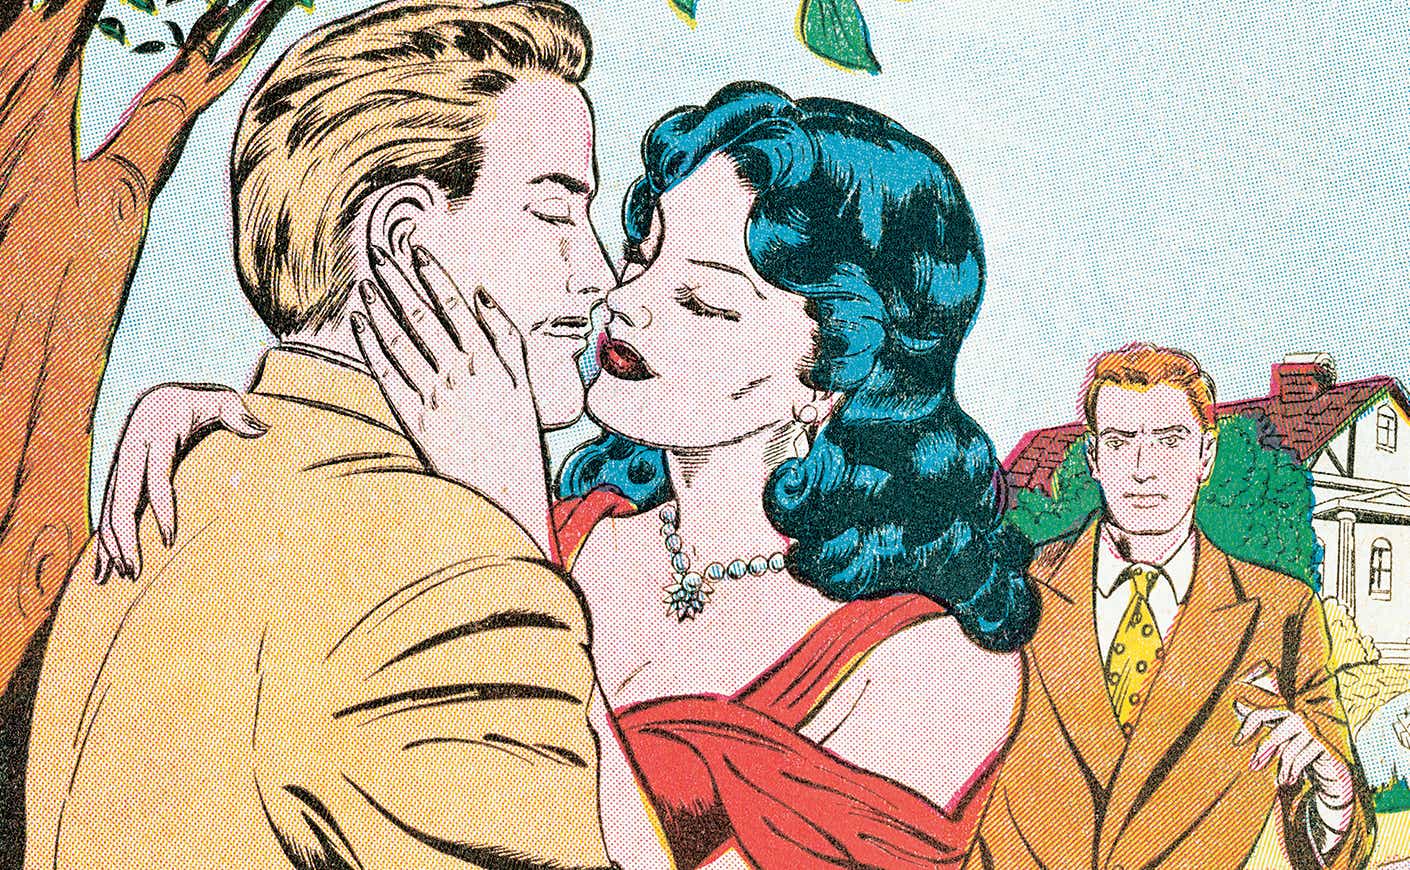 Comic of woman kissing man near a tree while a man behind her sees